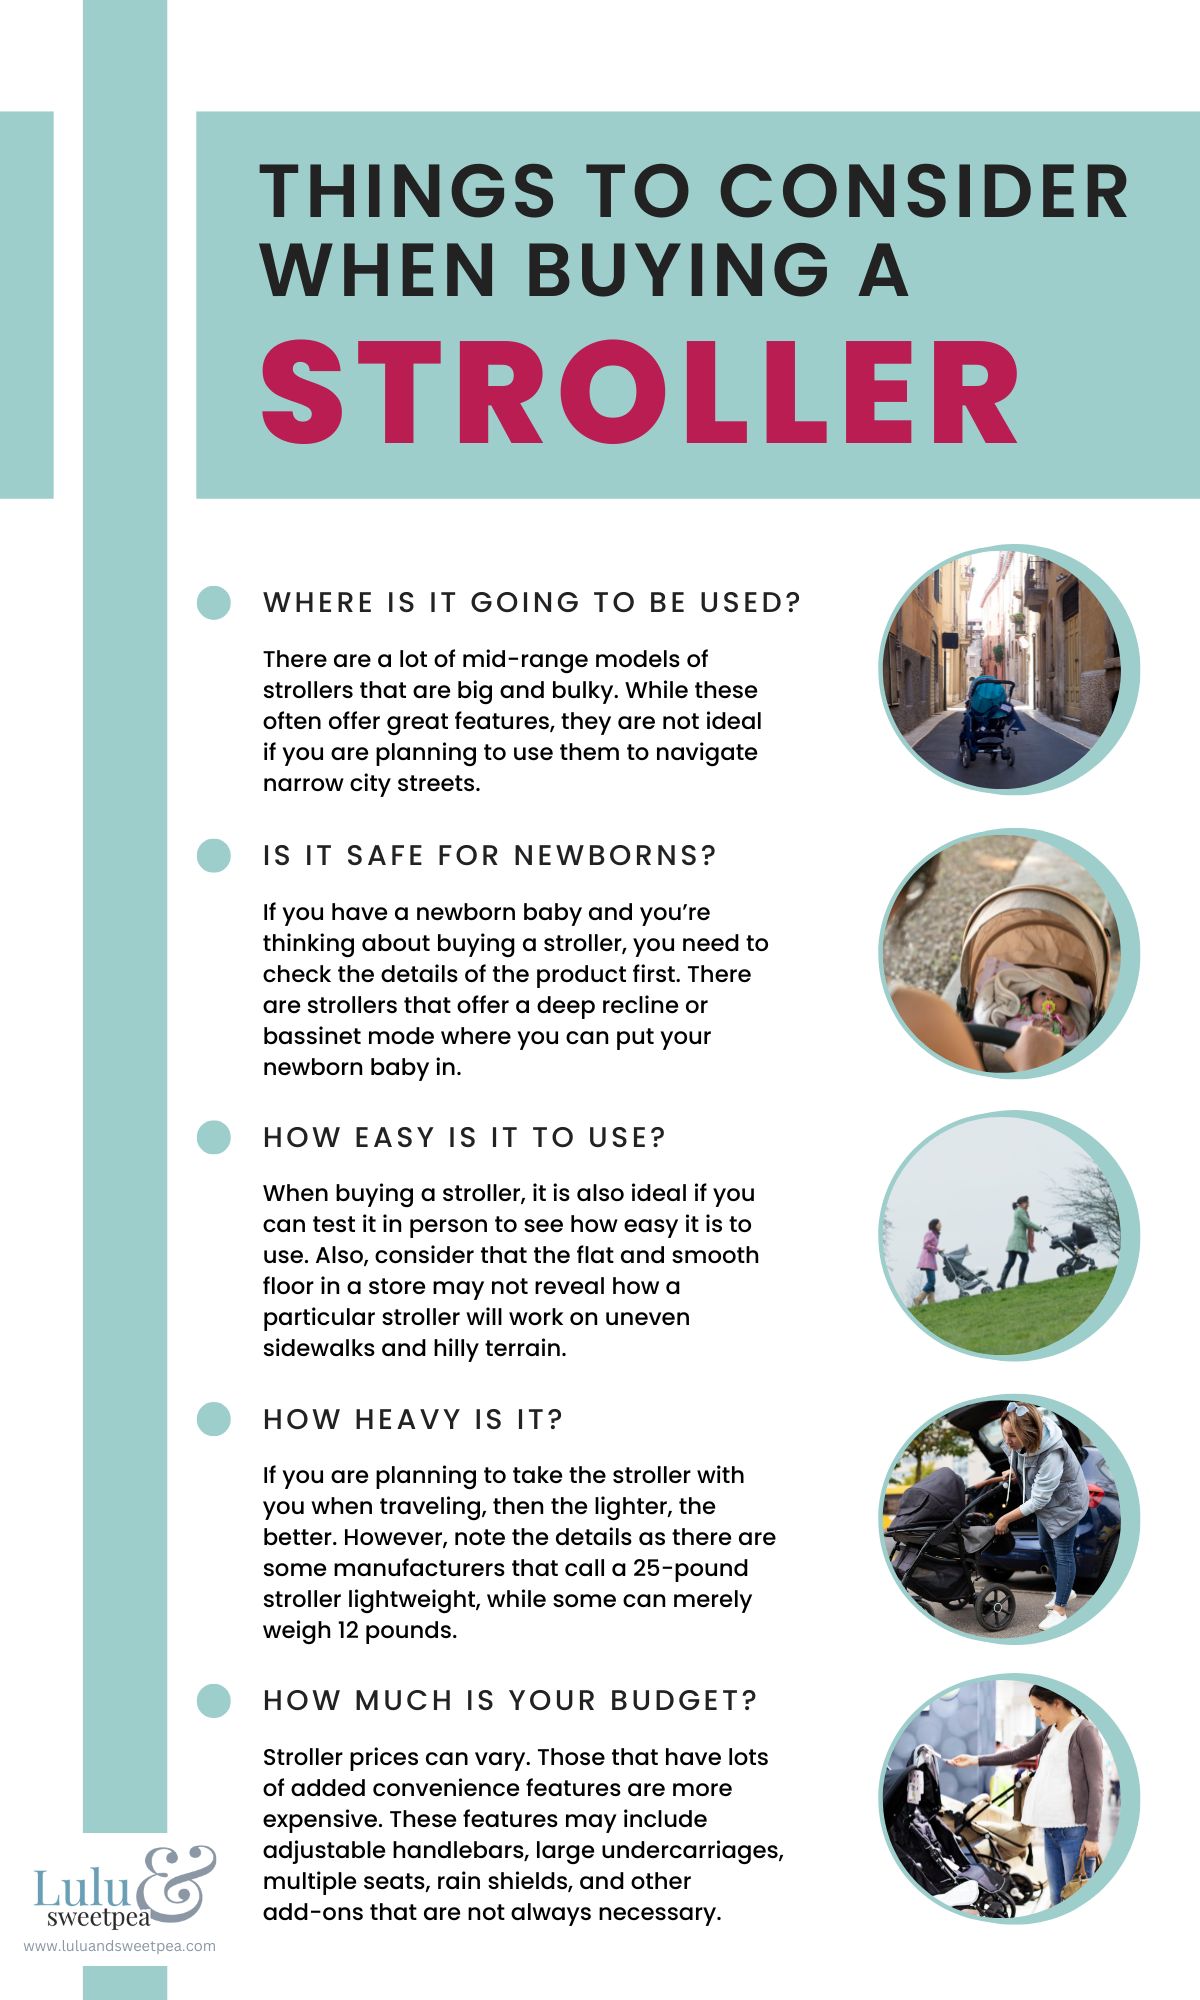 Things to Consider When Buying a Stroller